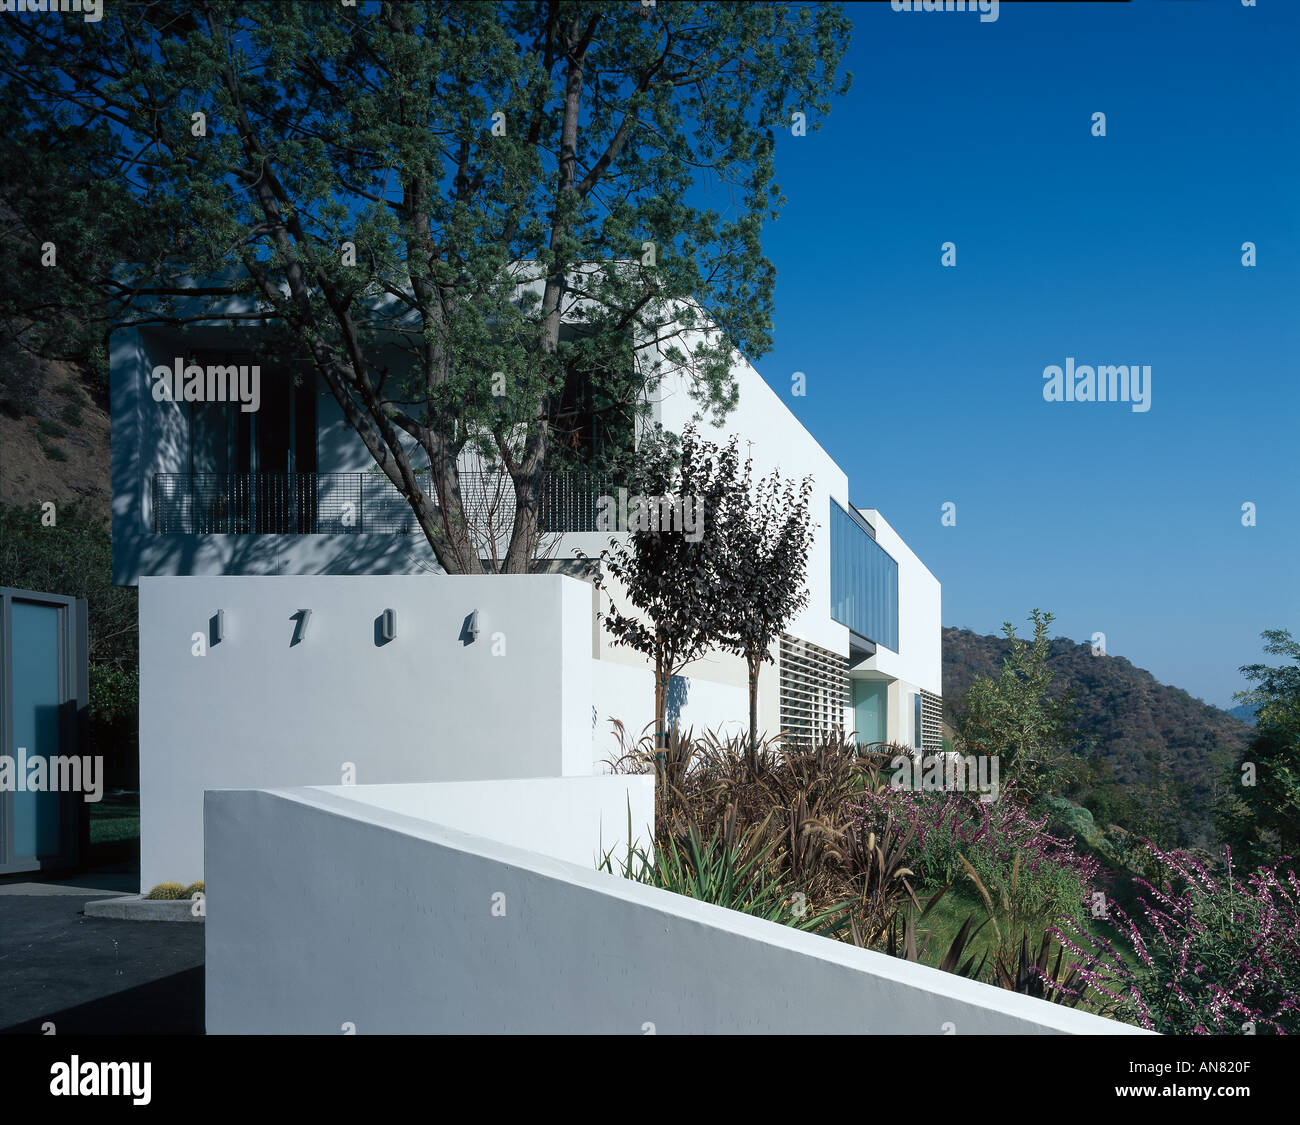 Oshry Residence, Bel Air, California. Exterior from entrance drive. Architect: SPF Architects Stock Photo